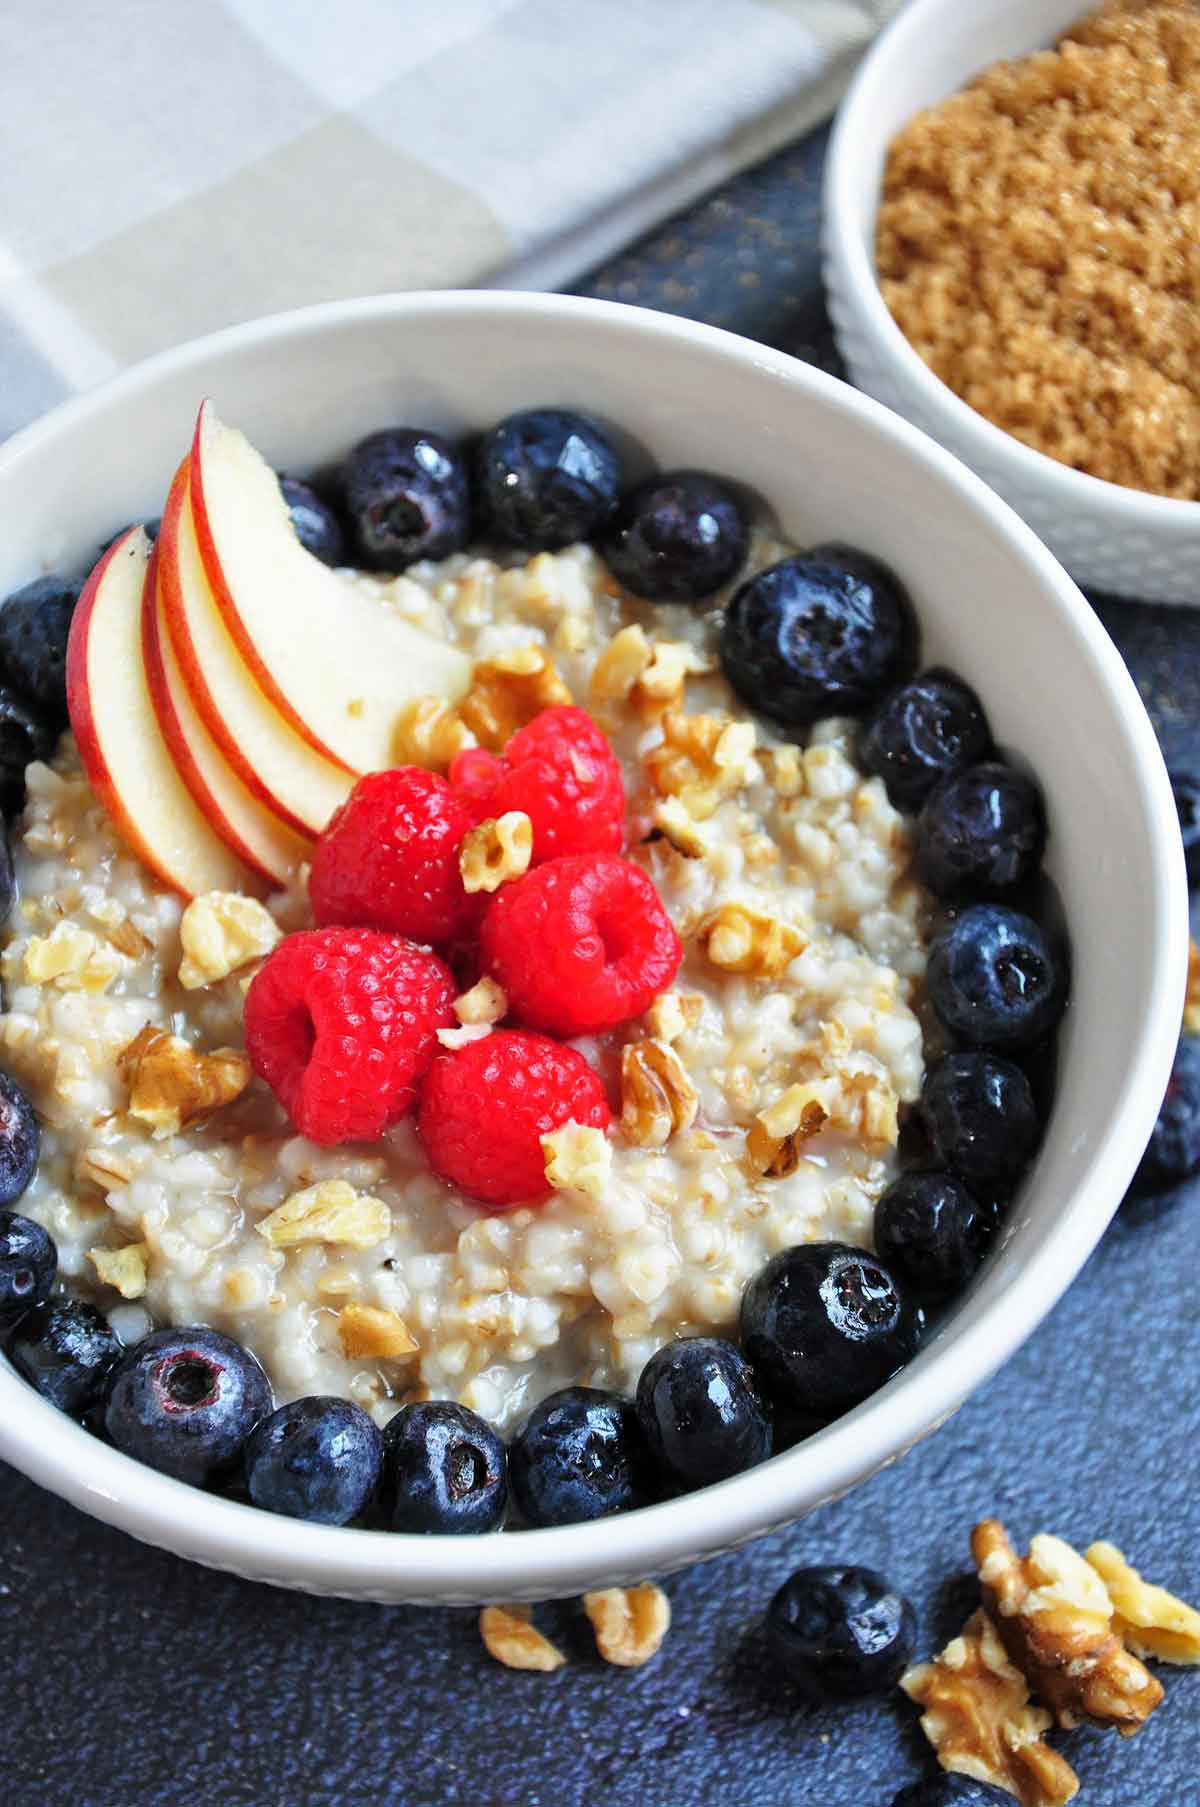 Instant pot cooked steel cut oats in bowl, served with berries and nuts on top.